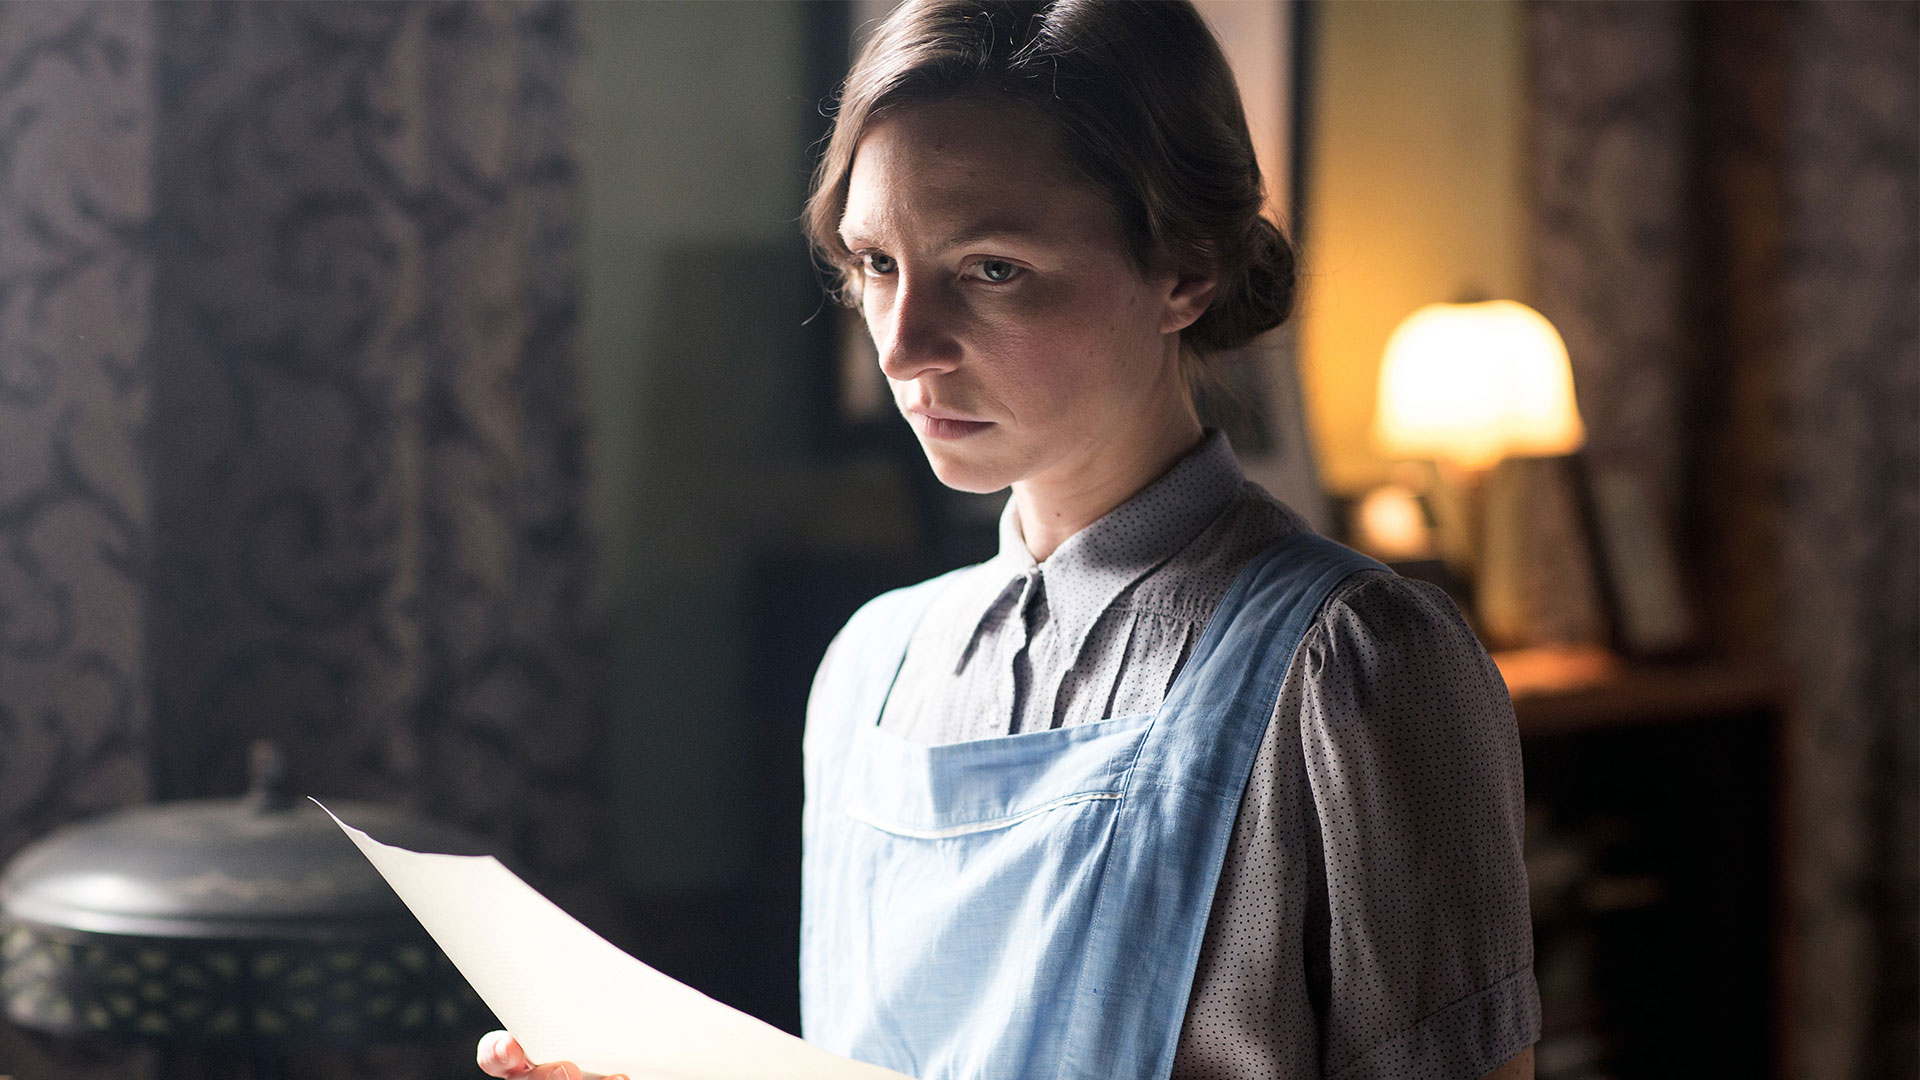 Lou Andreas Salome In Nazi Germany, Lou's caretaker holds a paper letter and looks concerned